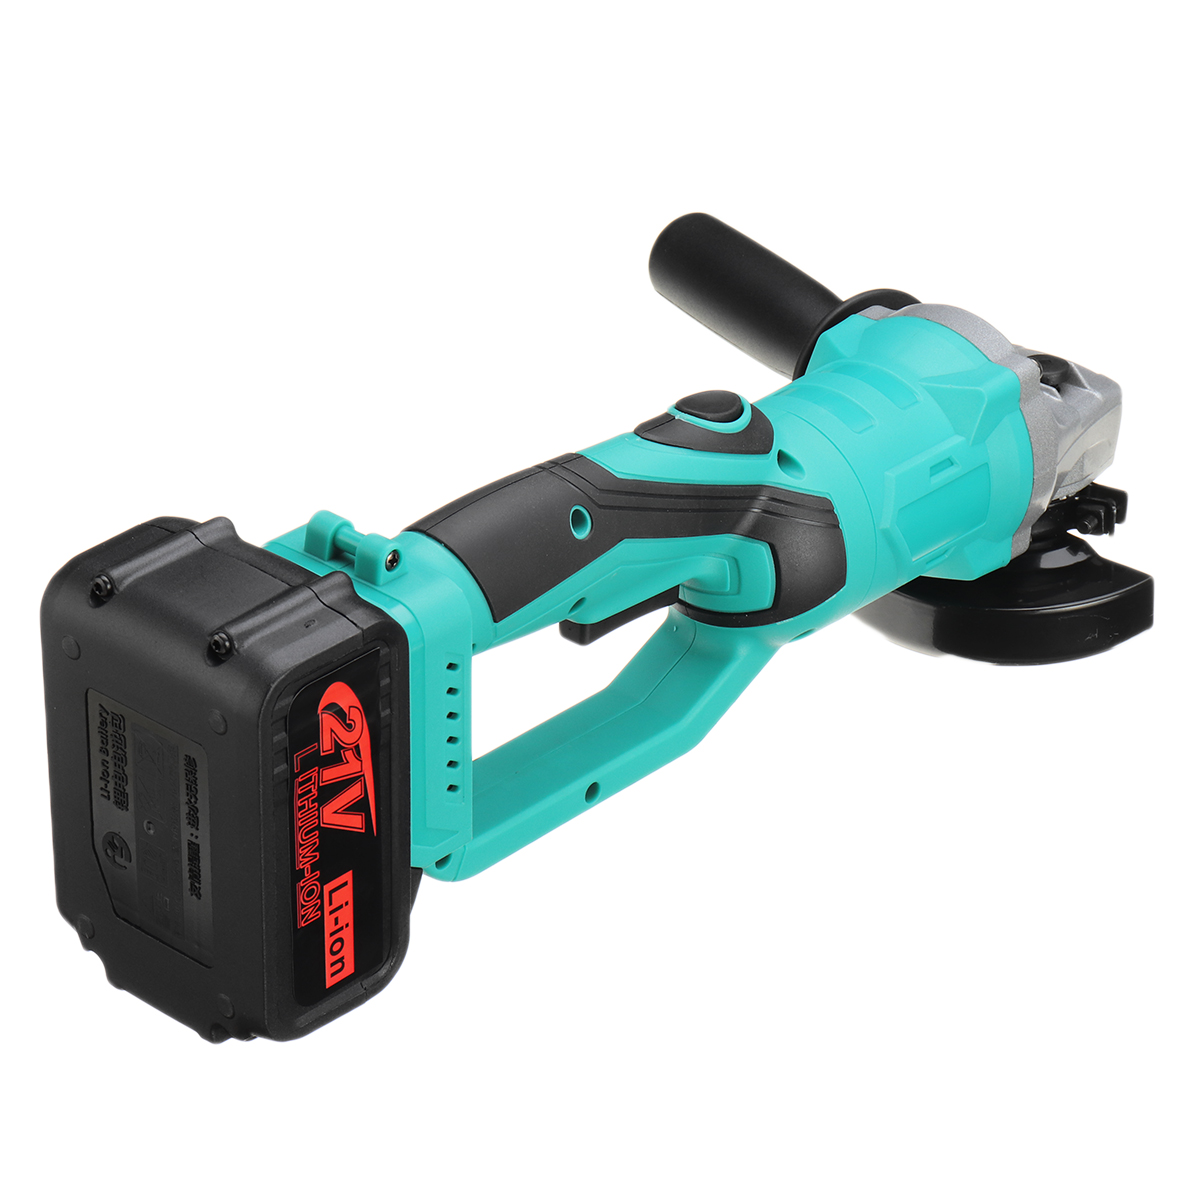 100mm-Cordless-Electric-Angle-Grinder-15000MAH-12-Lithium-Batteries-Brushless-Grinding-Machine-For-P-1882246-4